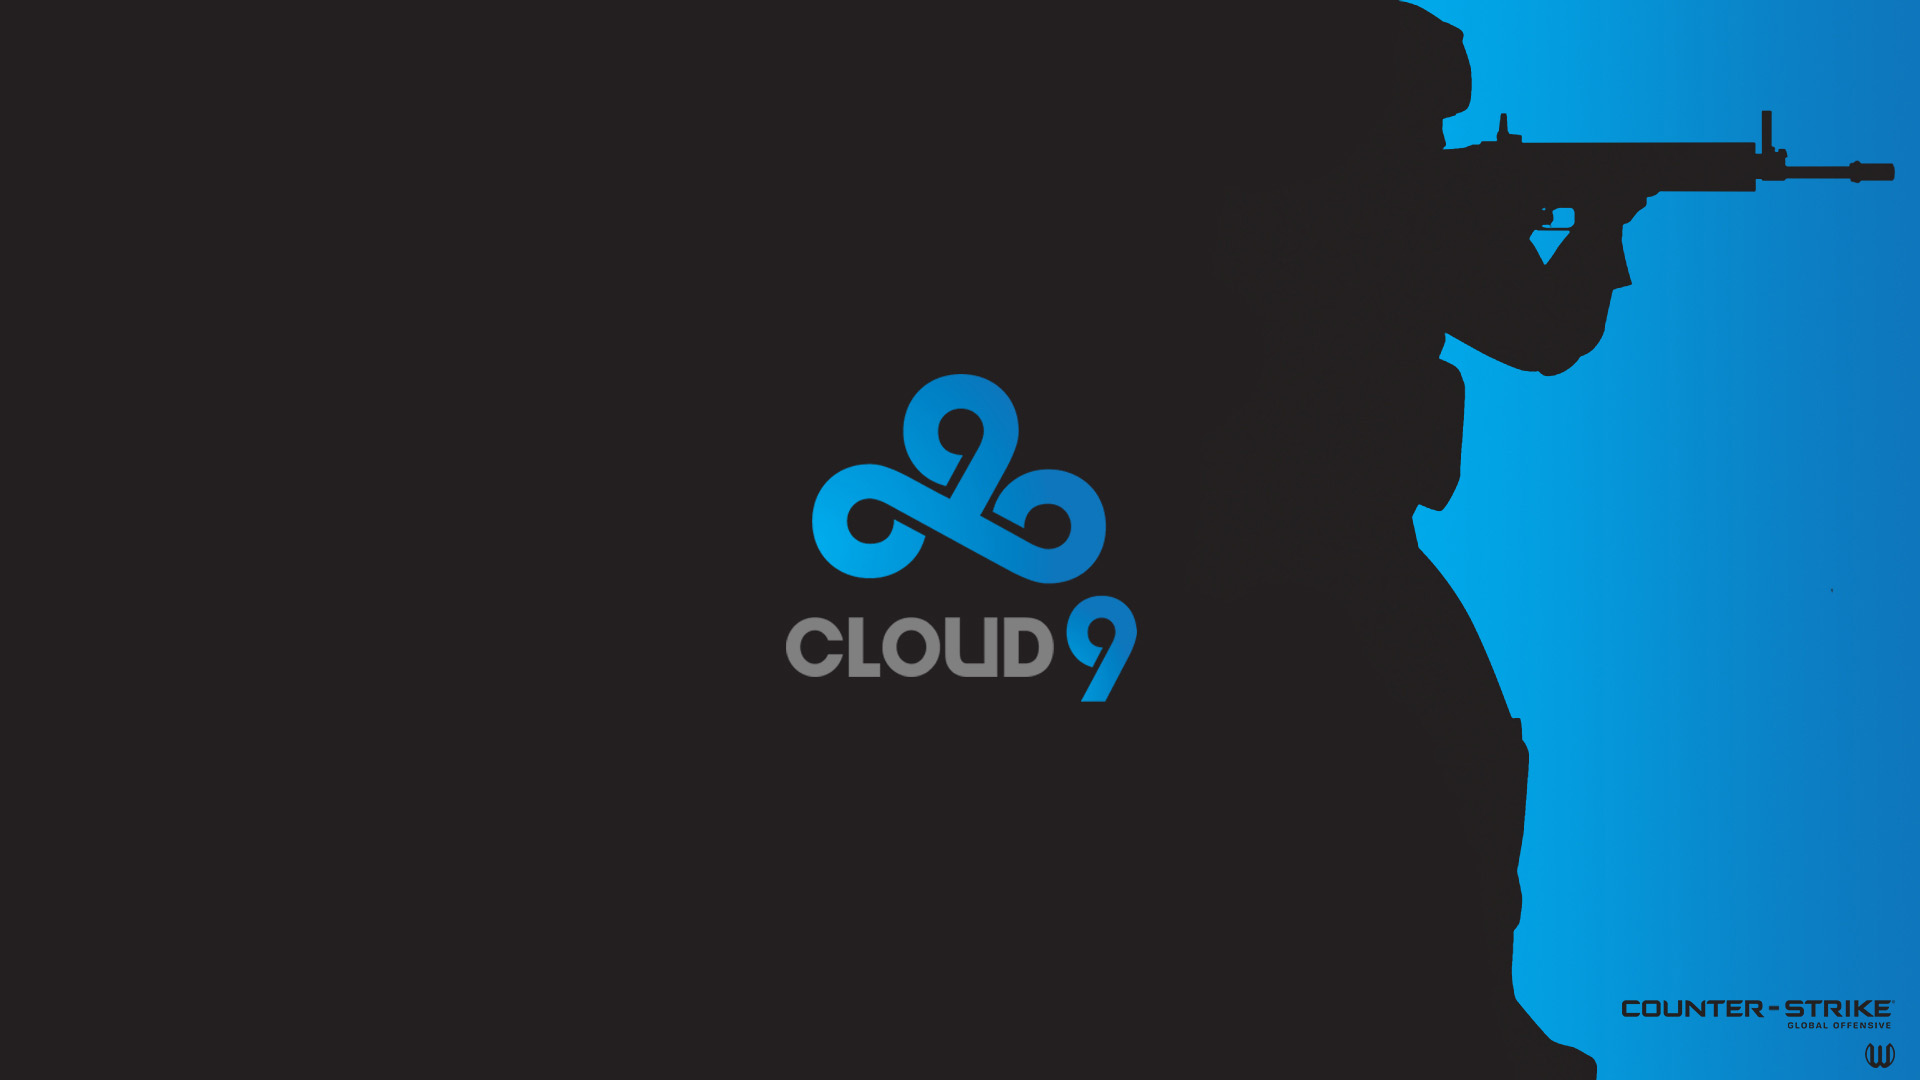 Free download Cloud 9 Wallpaper Related Keywords Suggestions Cloud 9